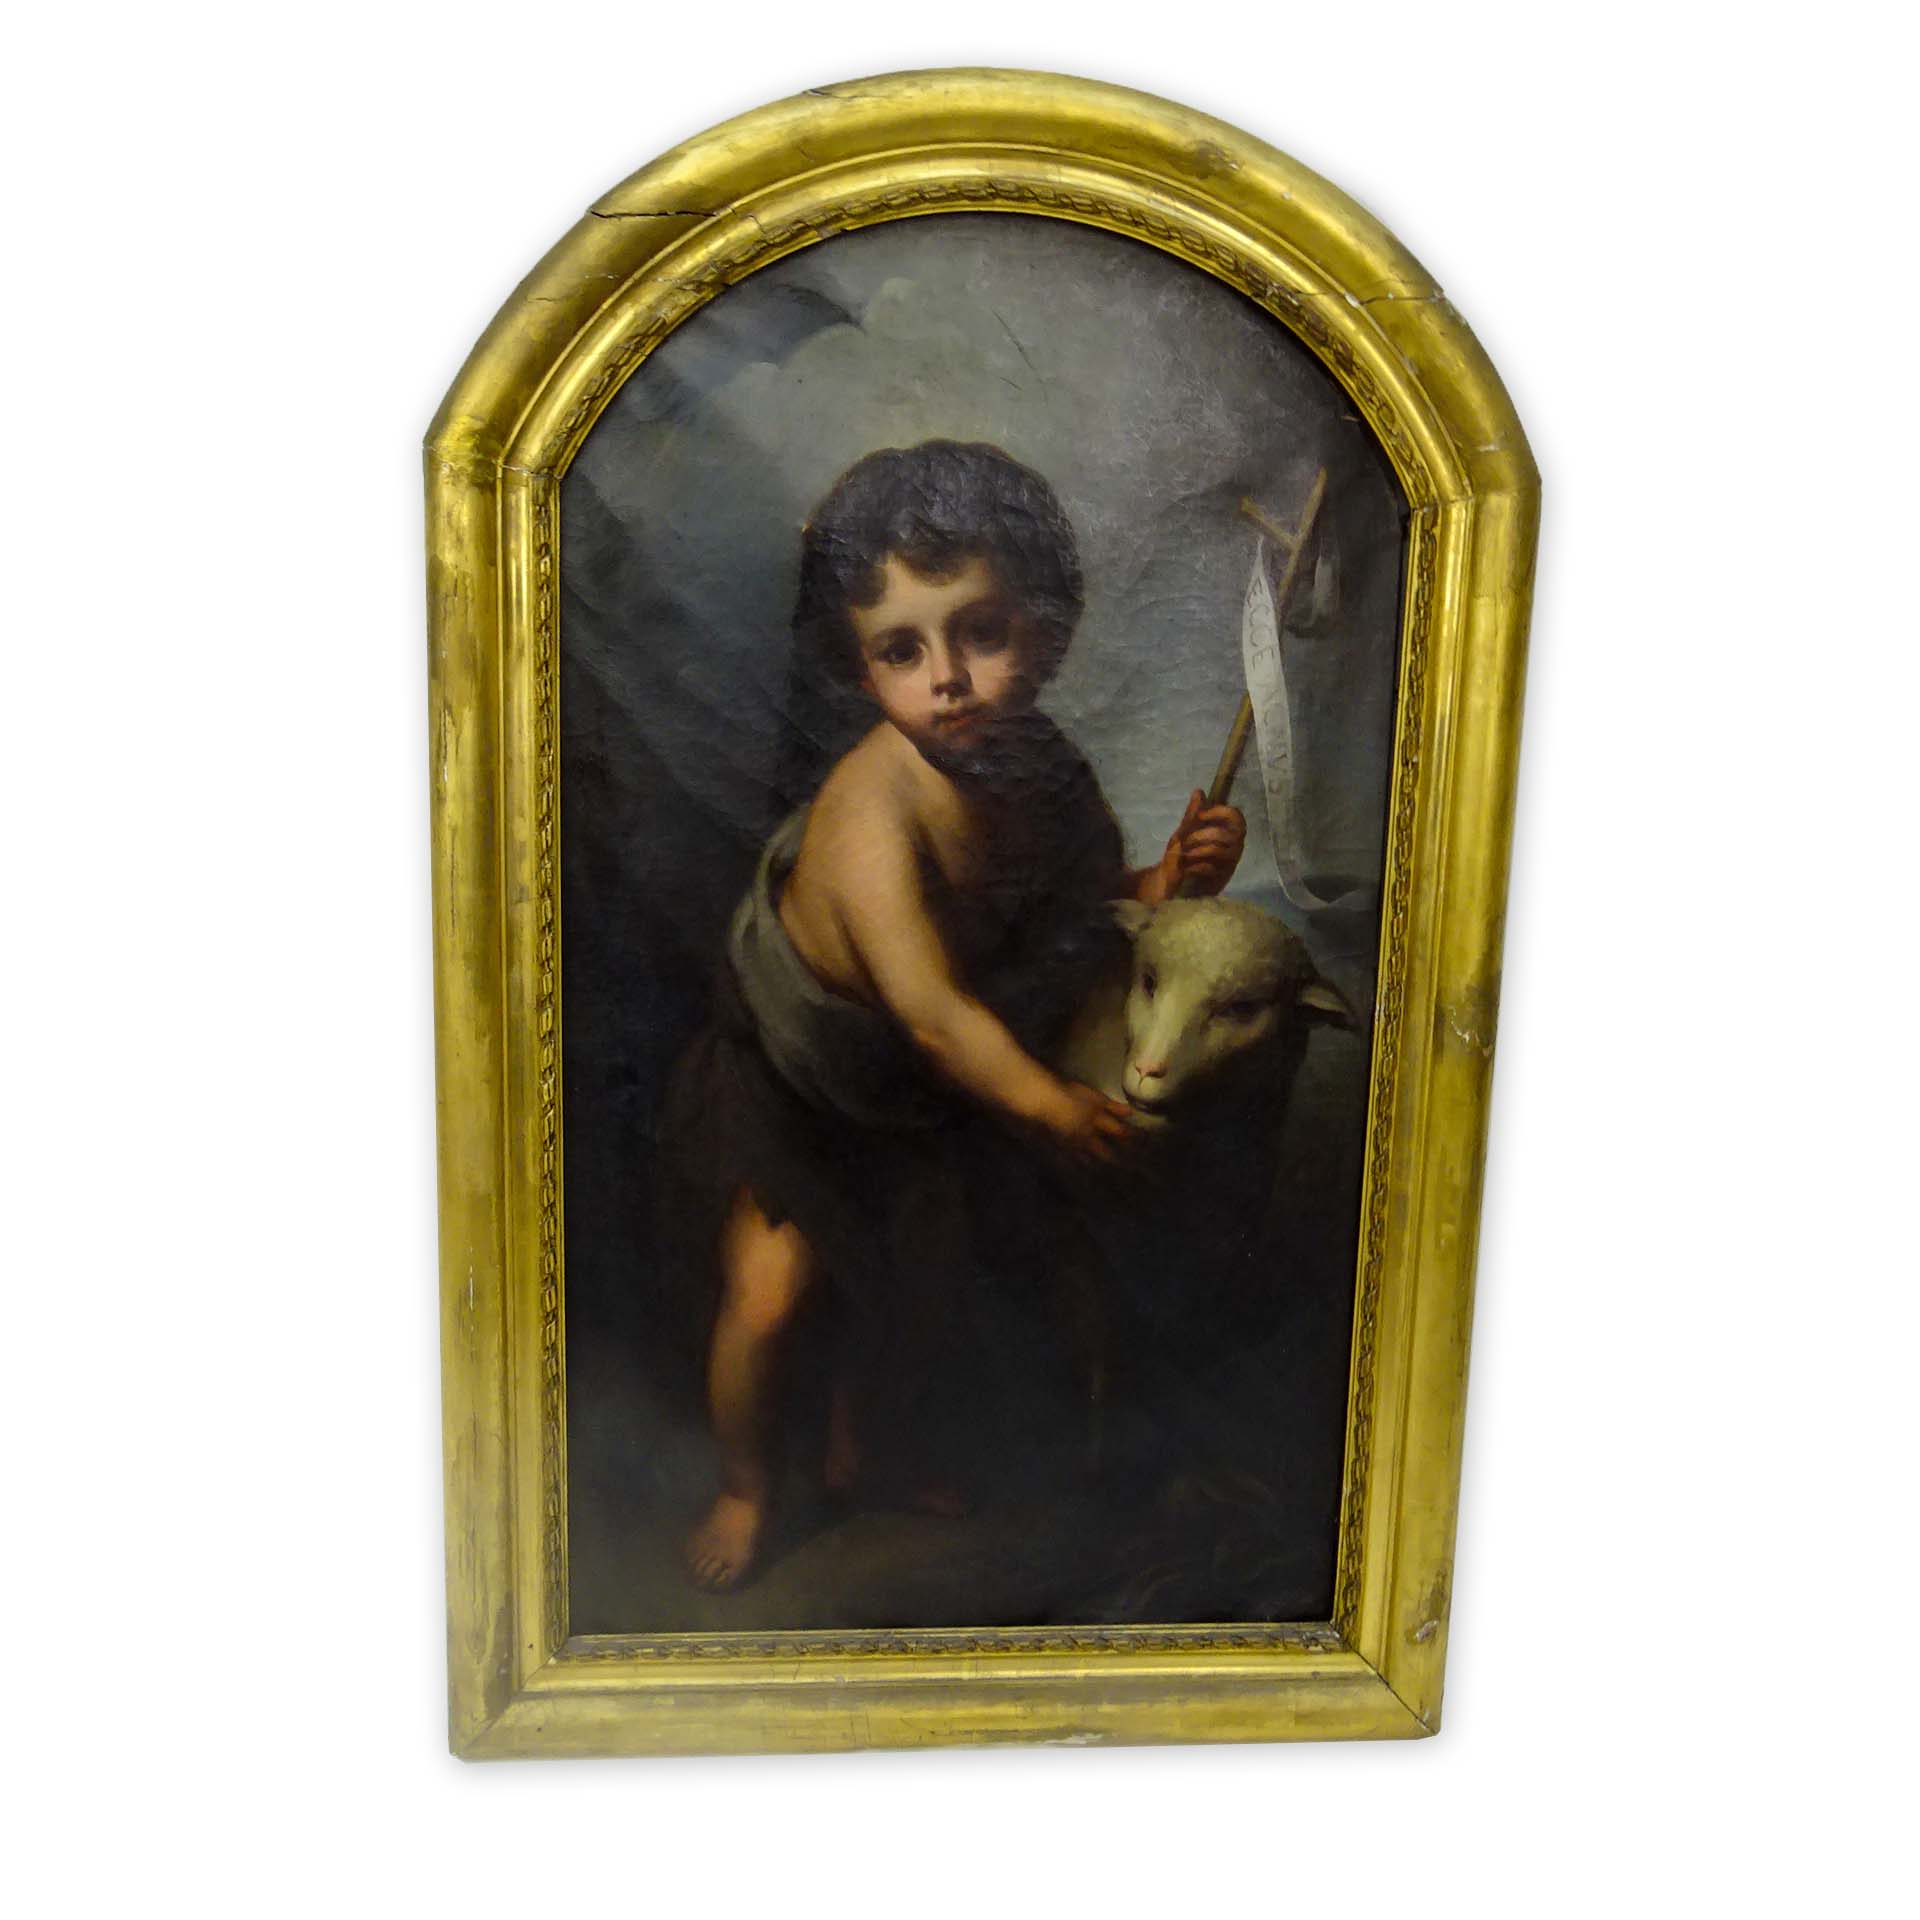 Late 18th or Early 19th Century Old Master Style